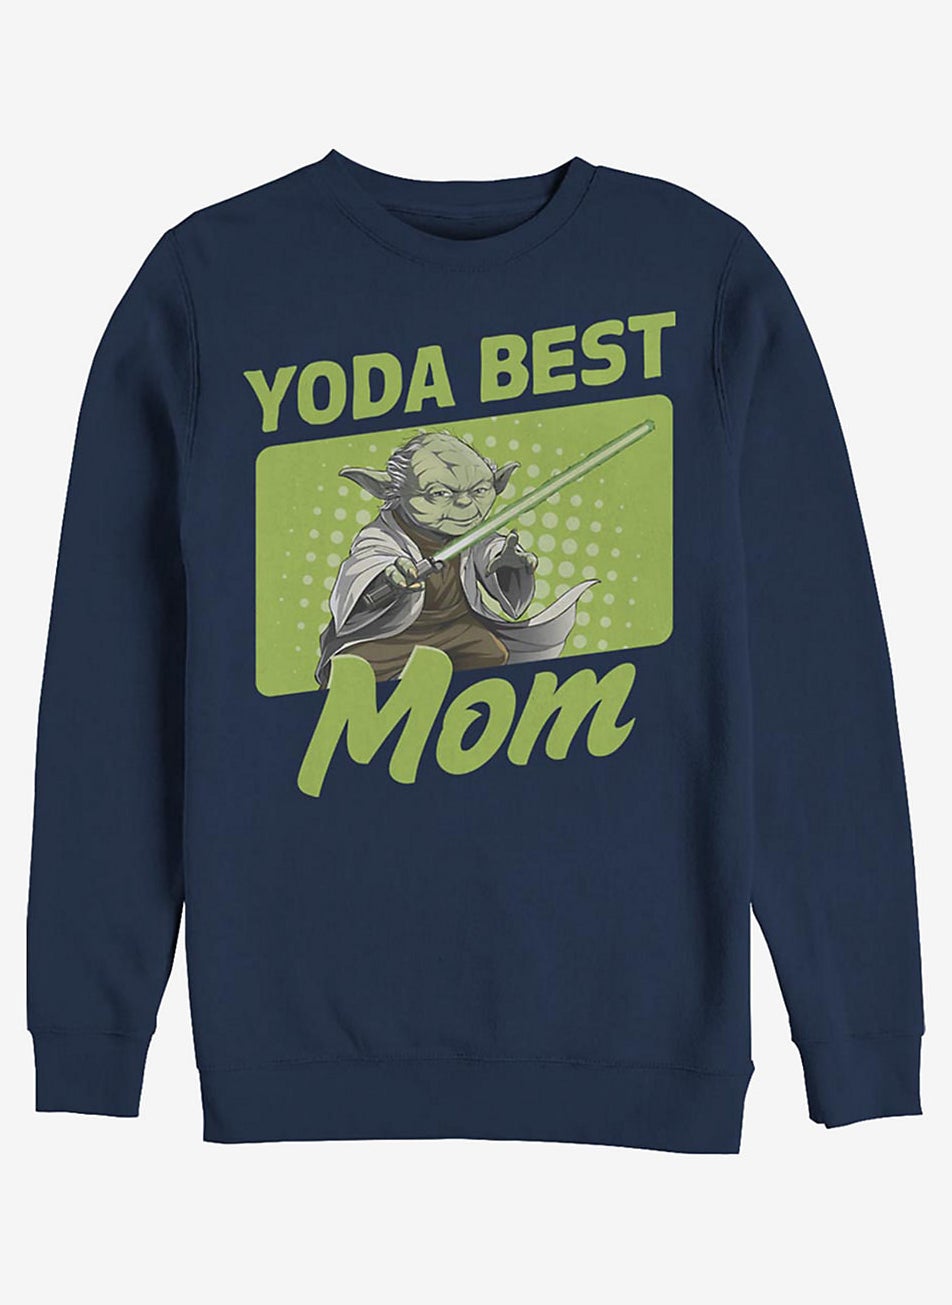 navy sweatshirt with graphic of Yoda and the text &quot;Yoda best mom&quot;